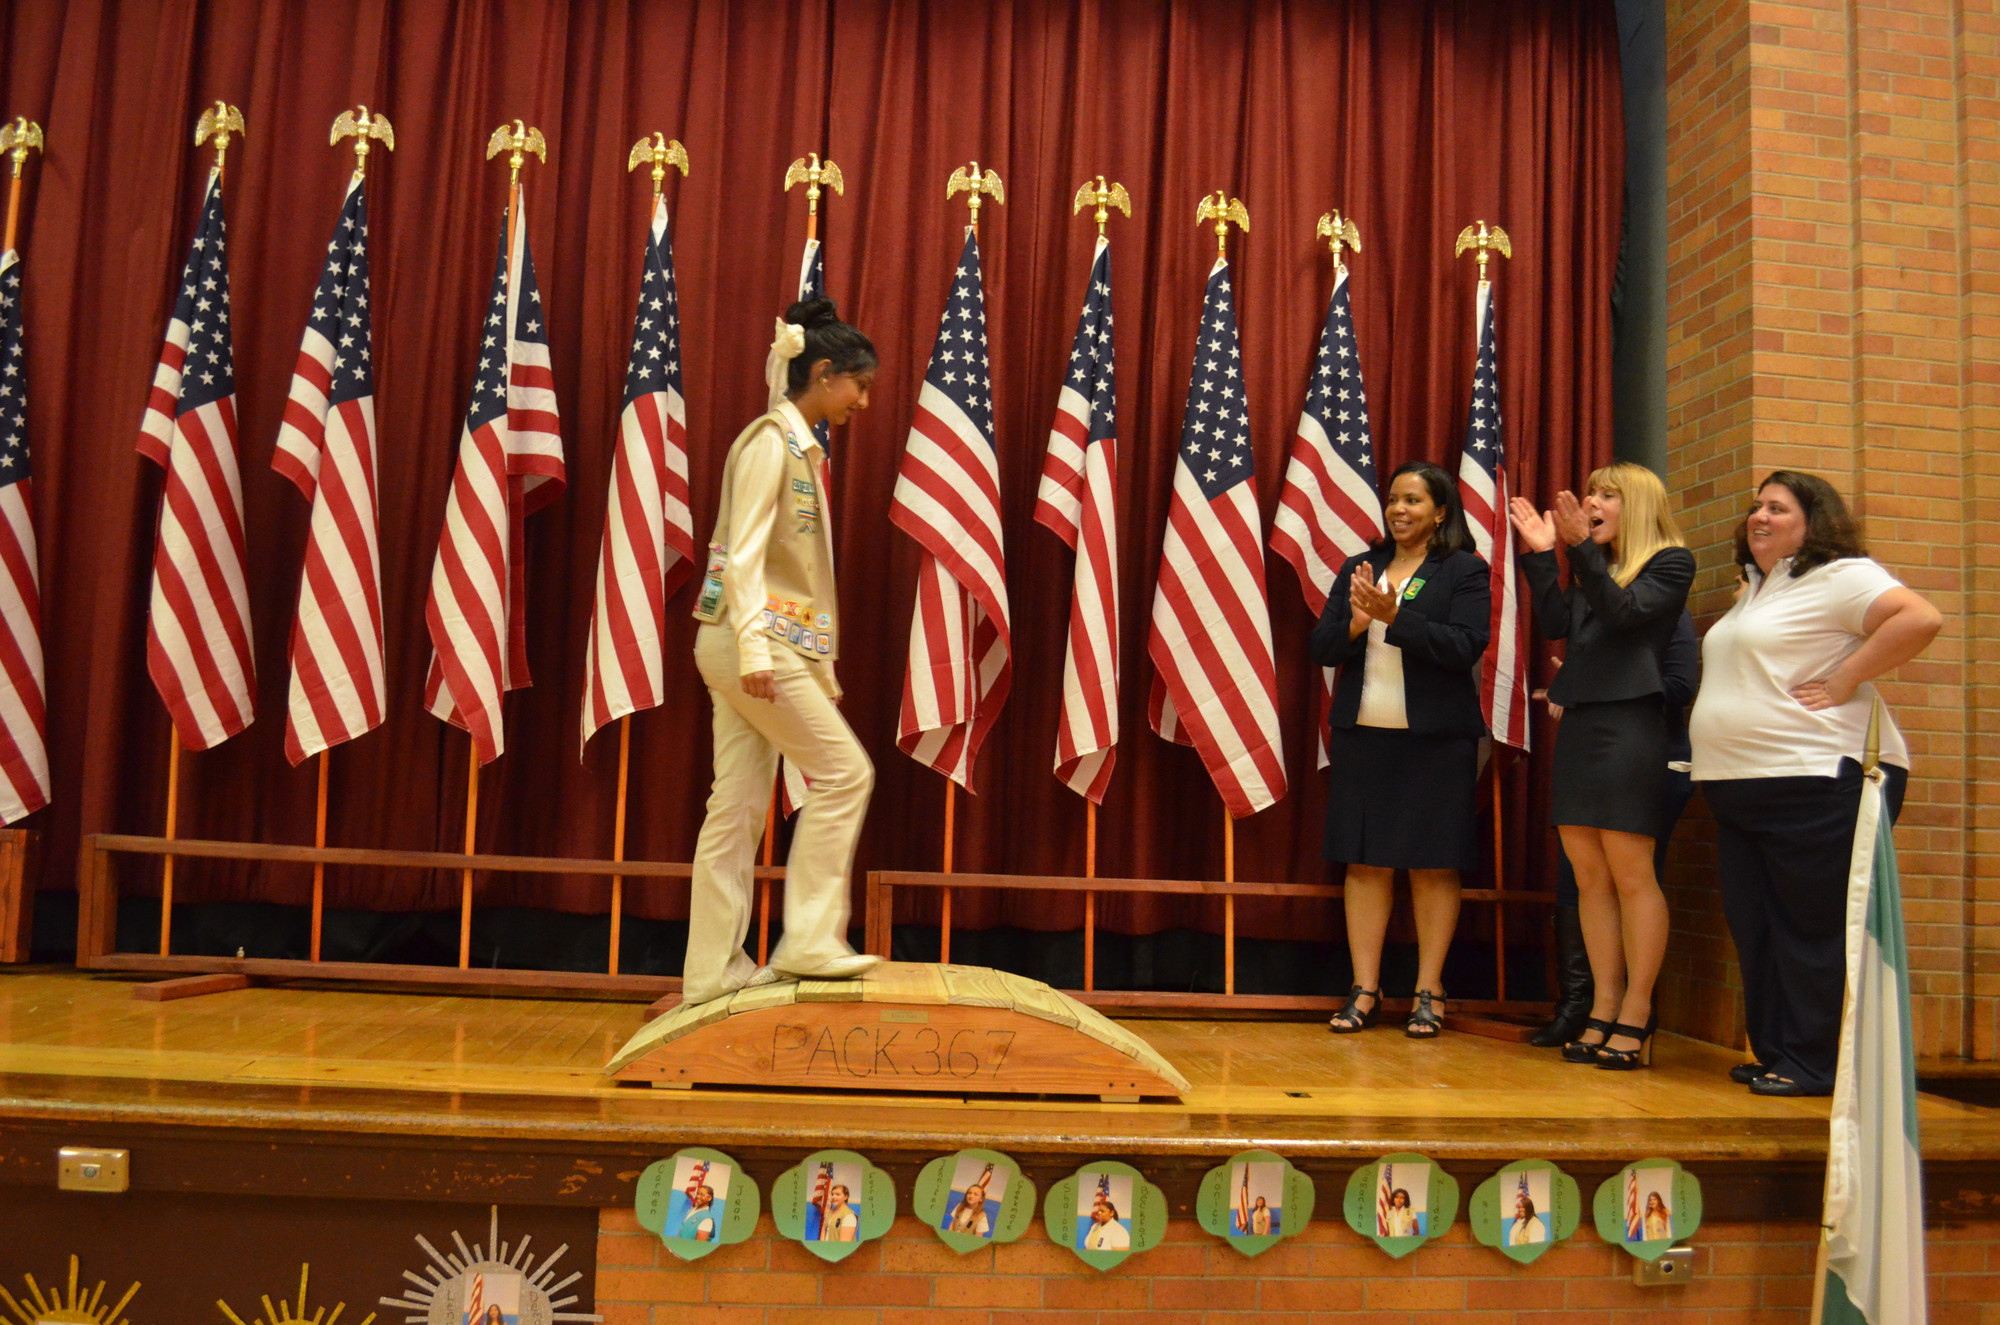 Jessica Prashad crossed the bridge from Ambassador to Adult Volunteer, one of 20 Girl Scouts to earn a rank advancement at the ceremony.